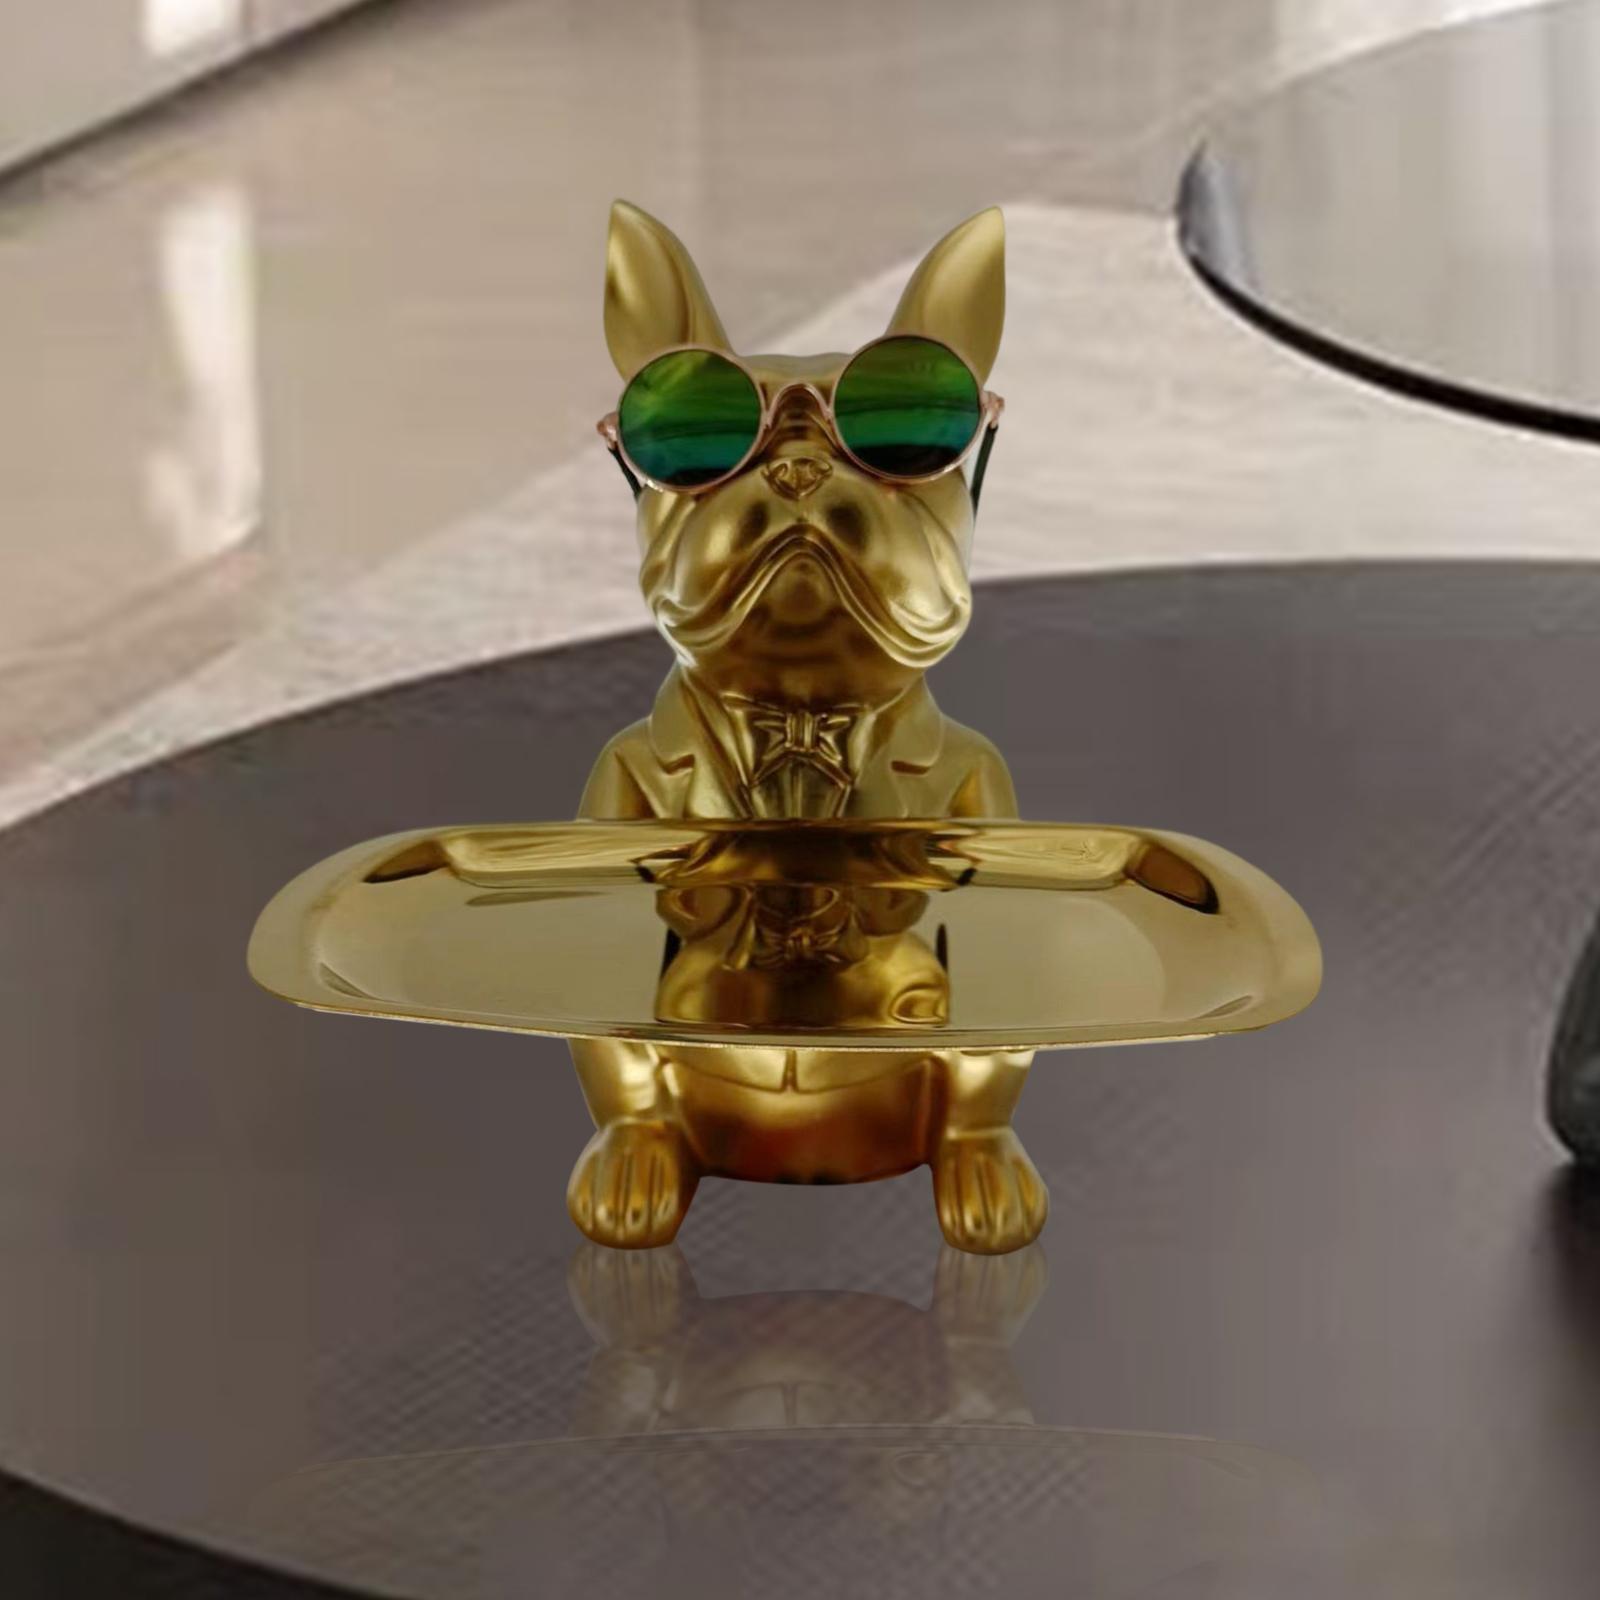 Resin Dog Art Statue Key Tray Key Bowl for Phone Coin Storage Golden